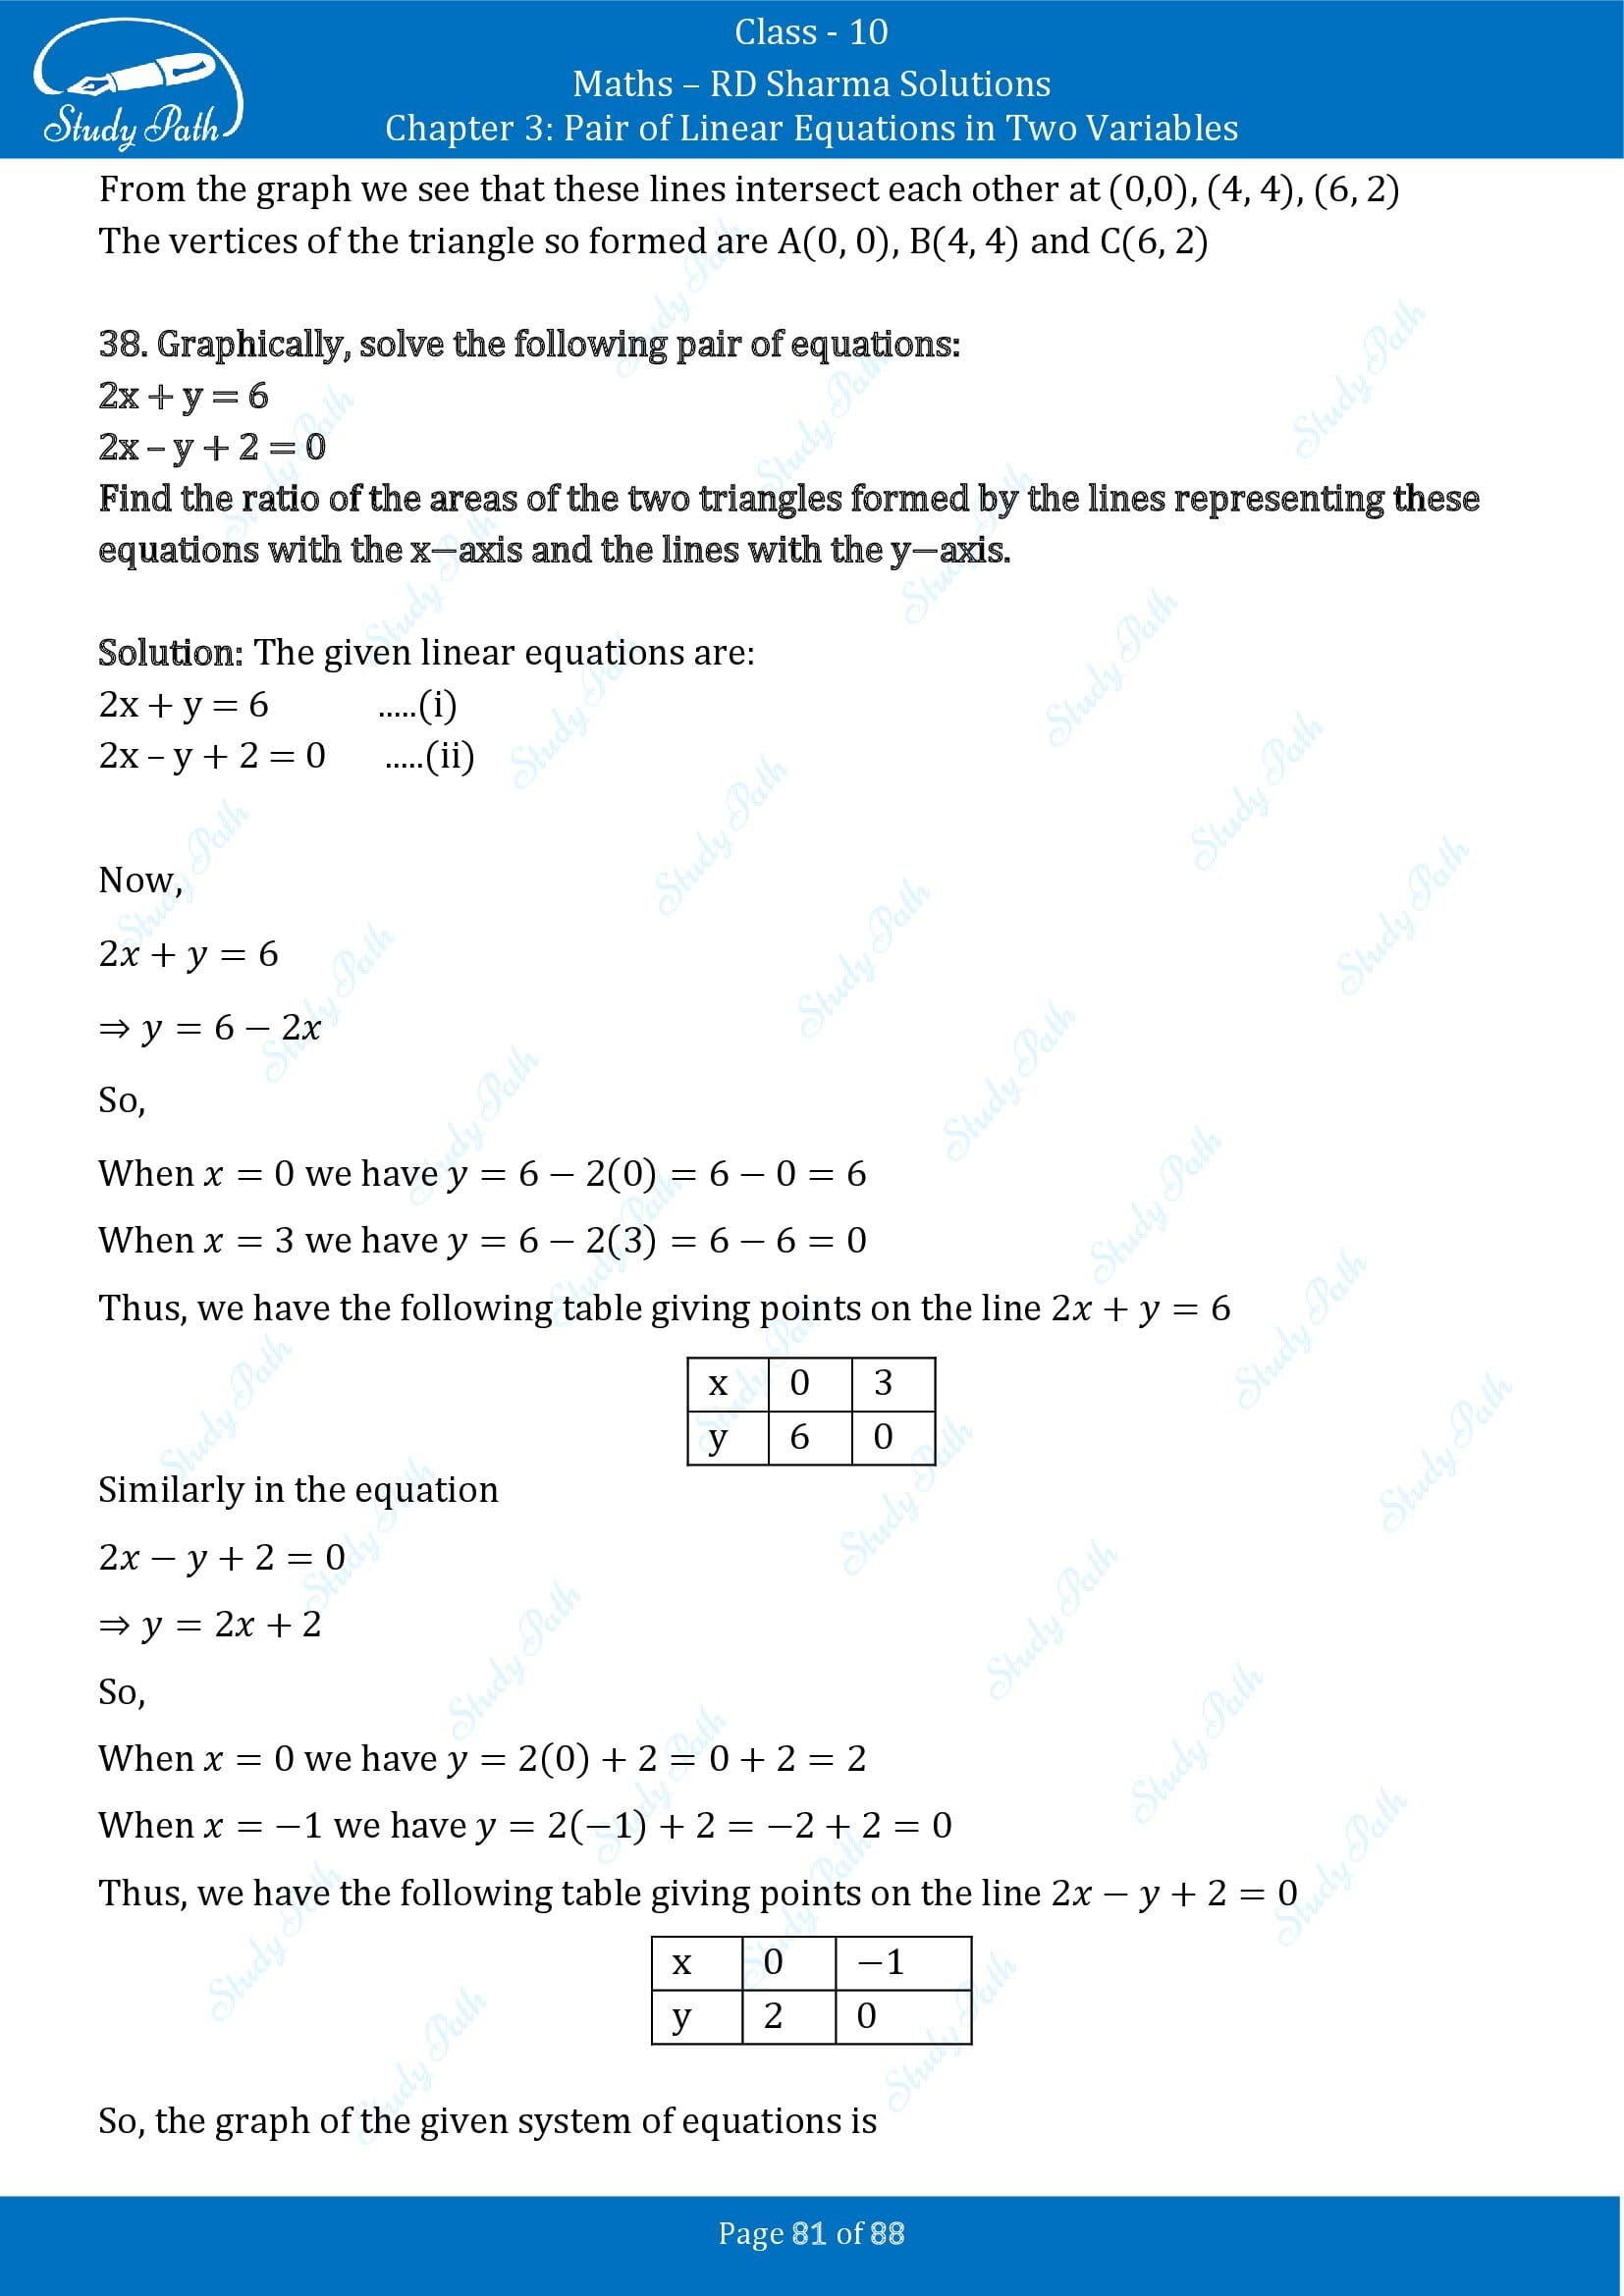 RD Sharma Solutions Class 10 Chapter 3 Pair of Linear Equations in Two Variables Exercise 3.2 00081